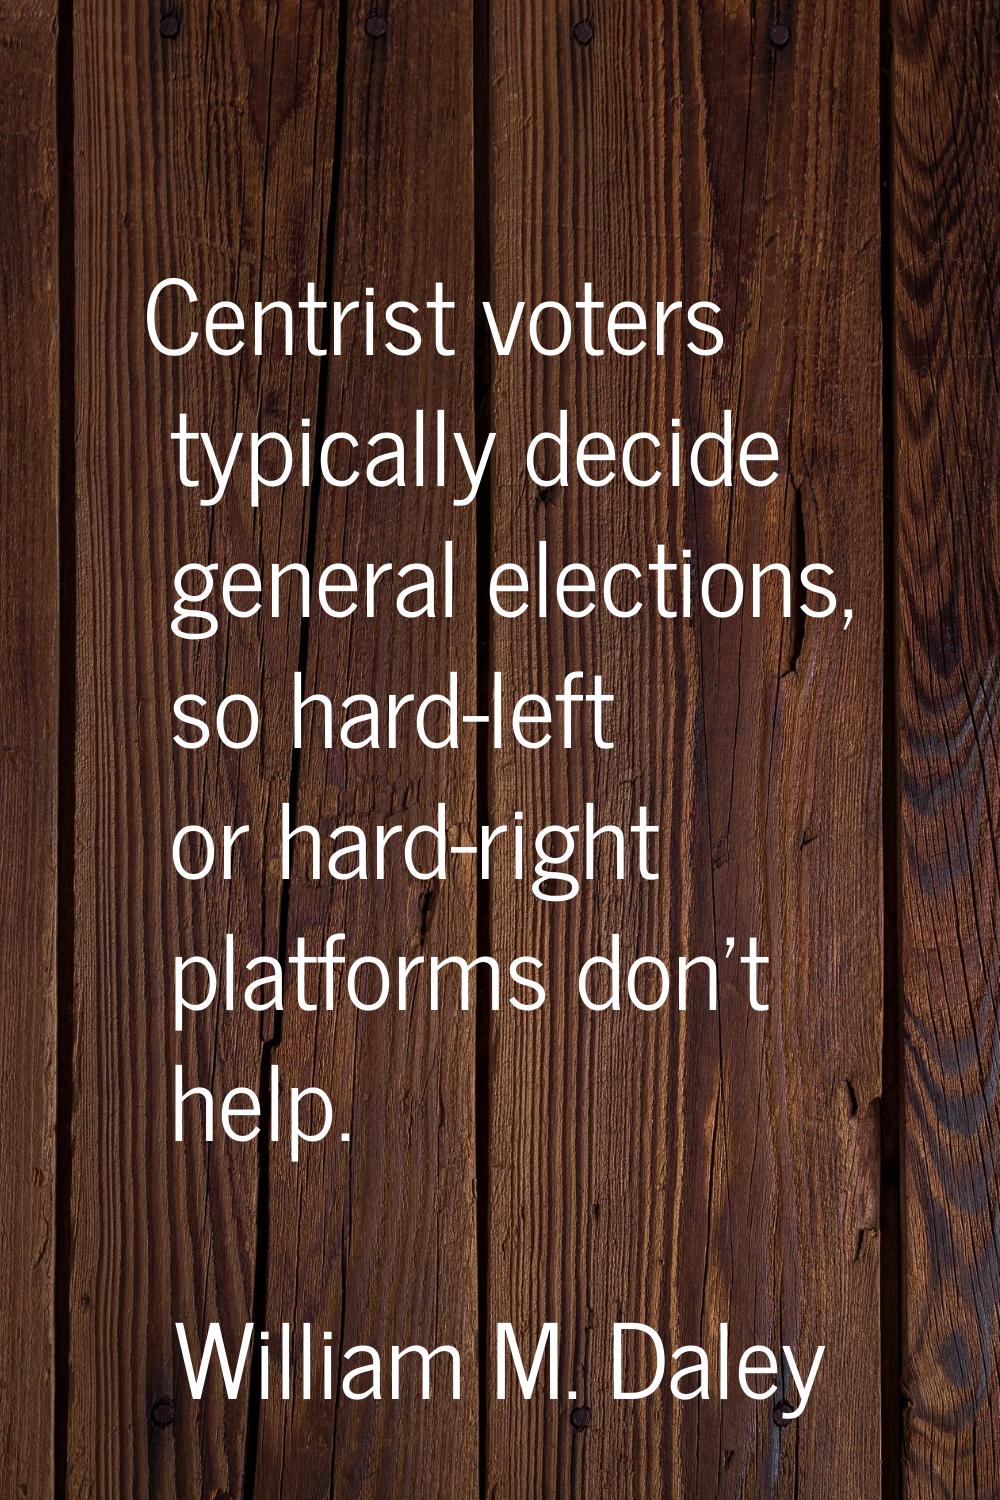 Centrist voters typically decide general elections, so hard-left or hard-right platforms don't help